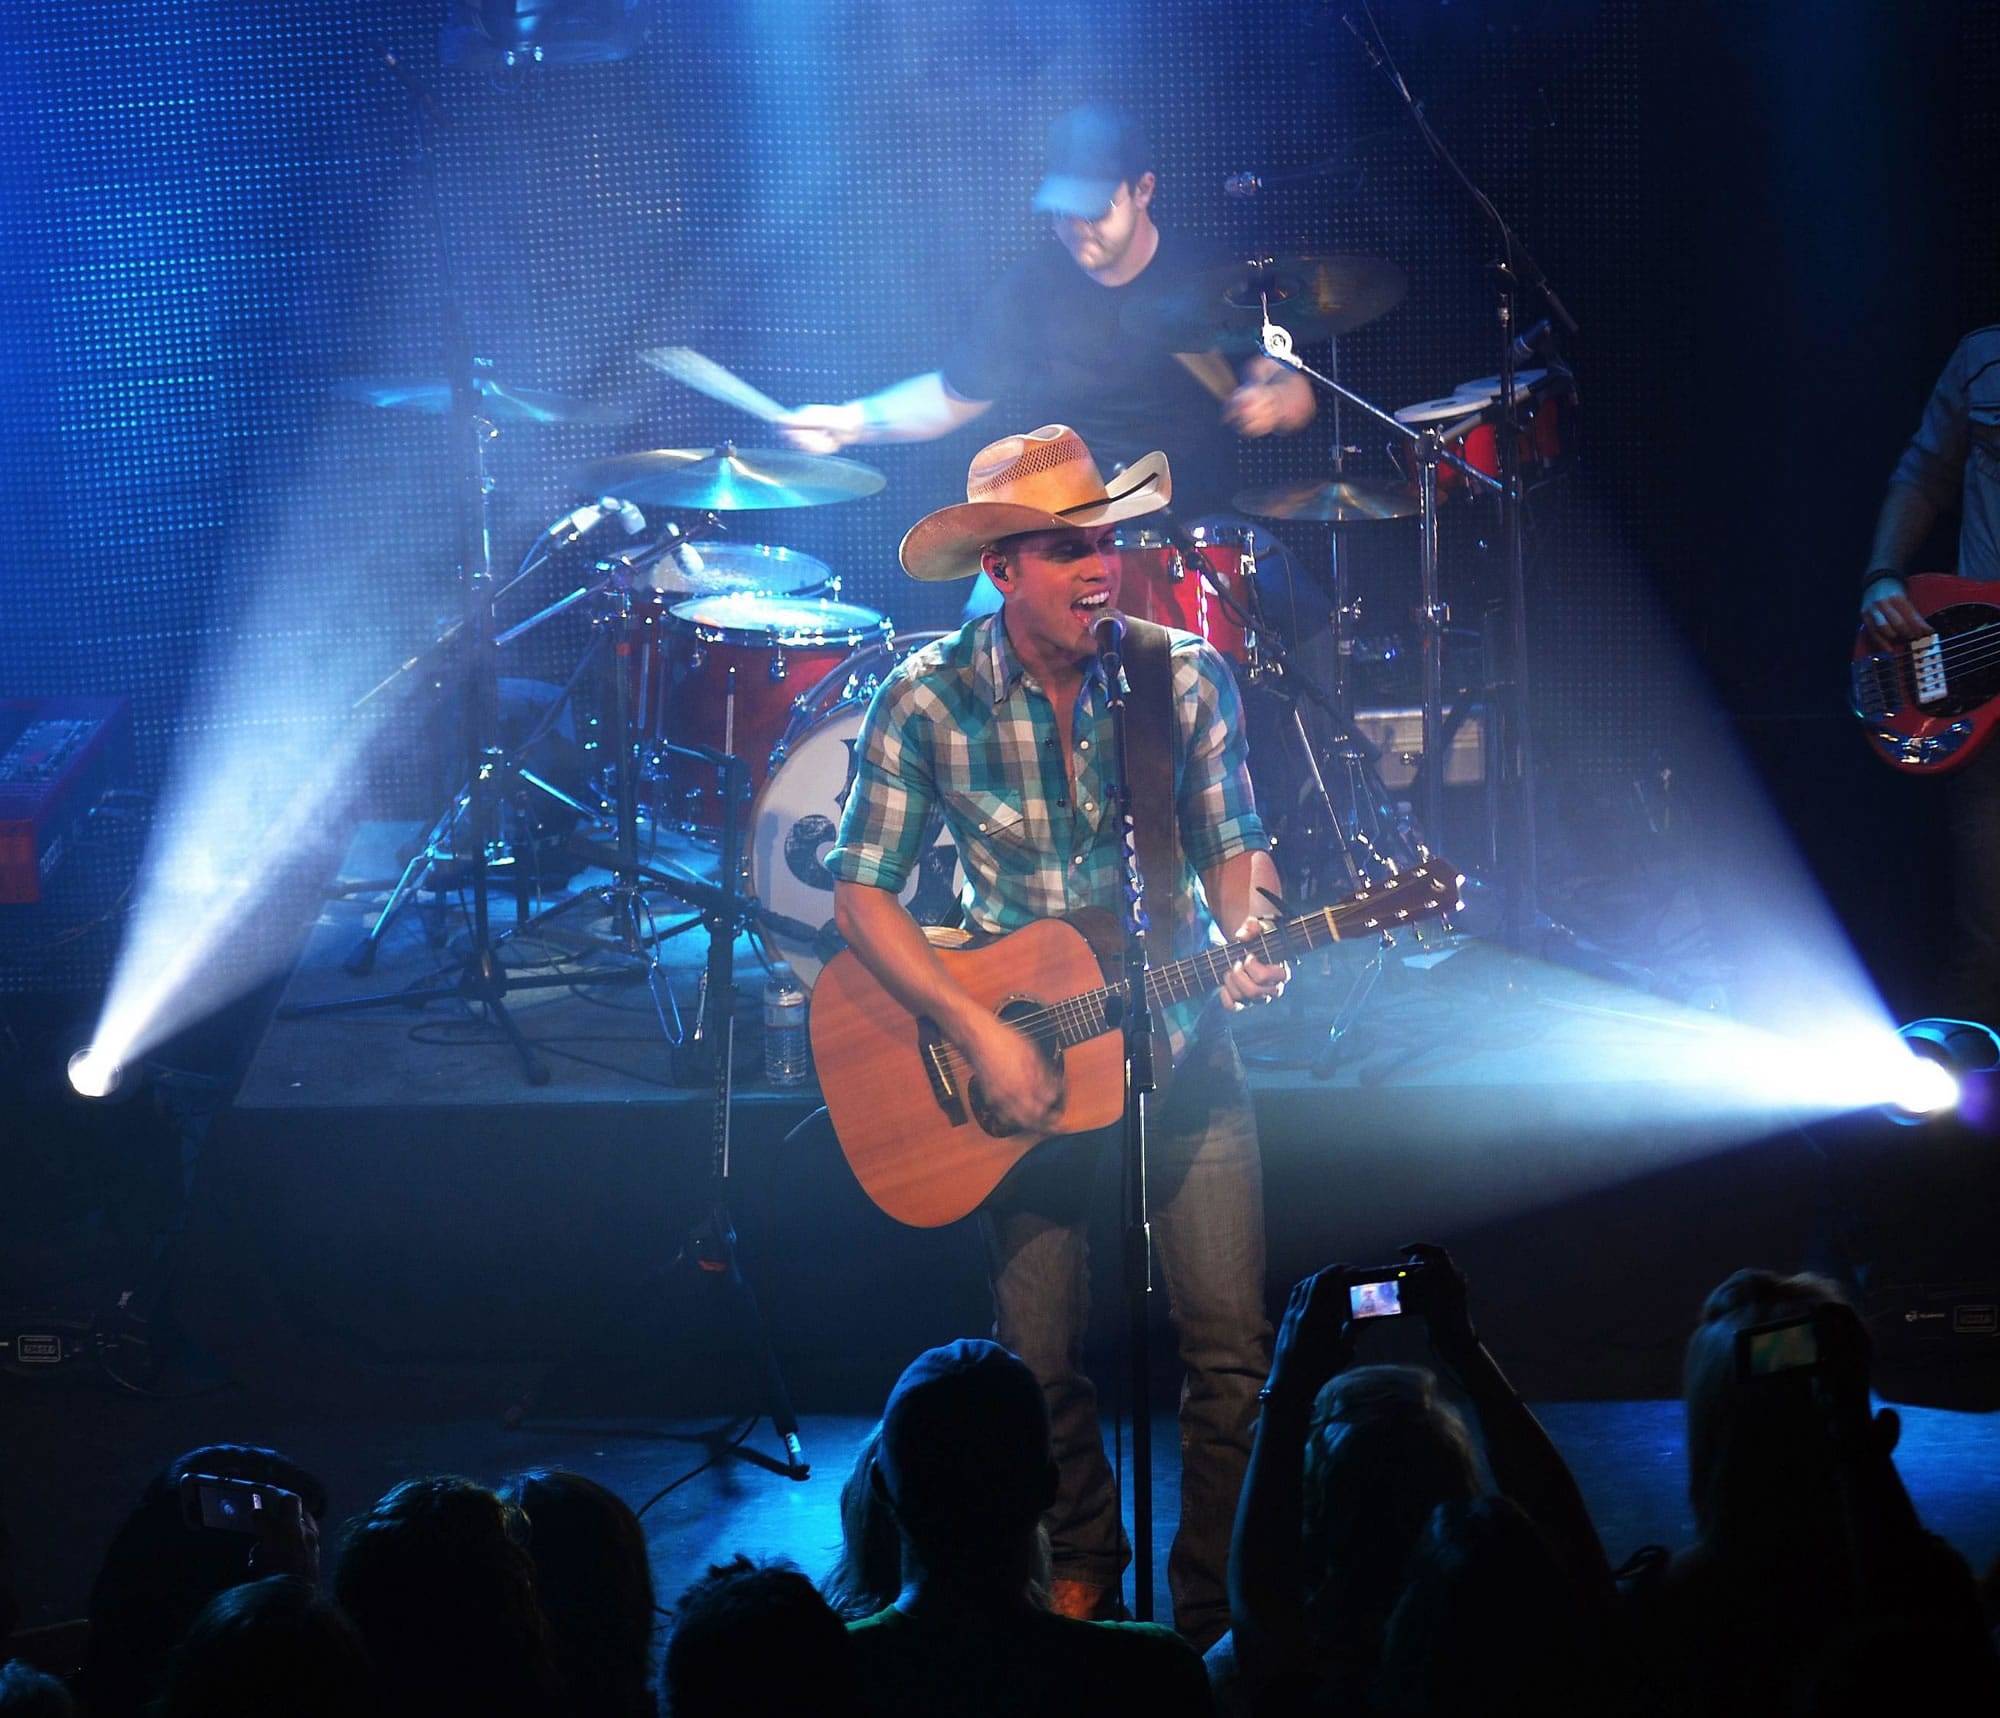 Brian Bayley for CMT
Rising country star Dustin Lynch will perform Sept. 9 at Alderbrook Park in Brush Prairie.